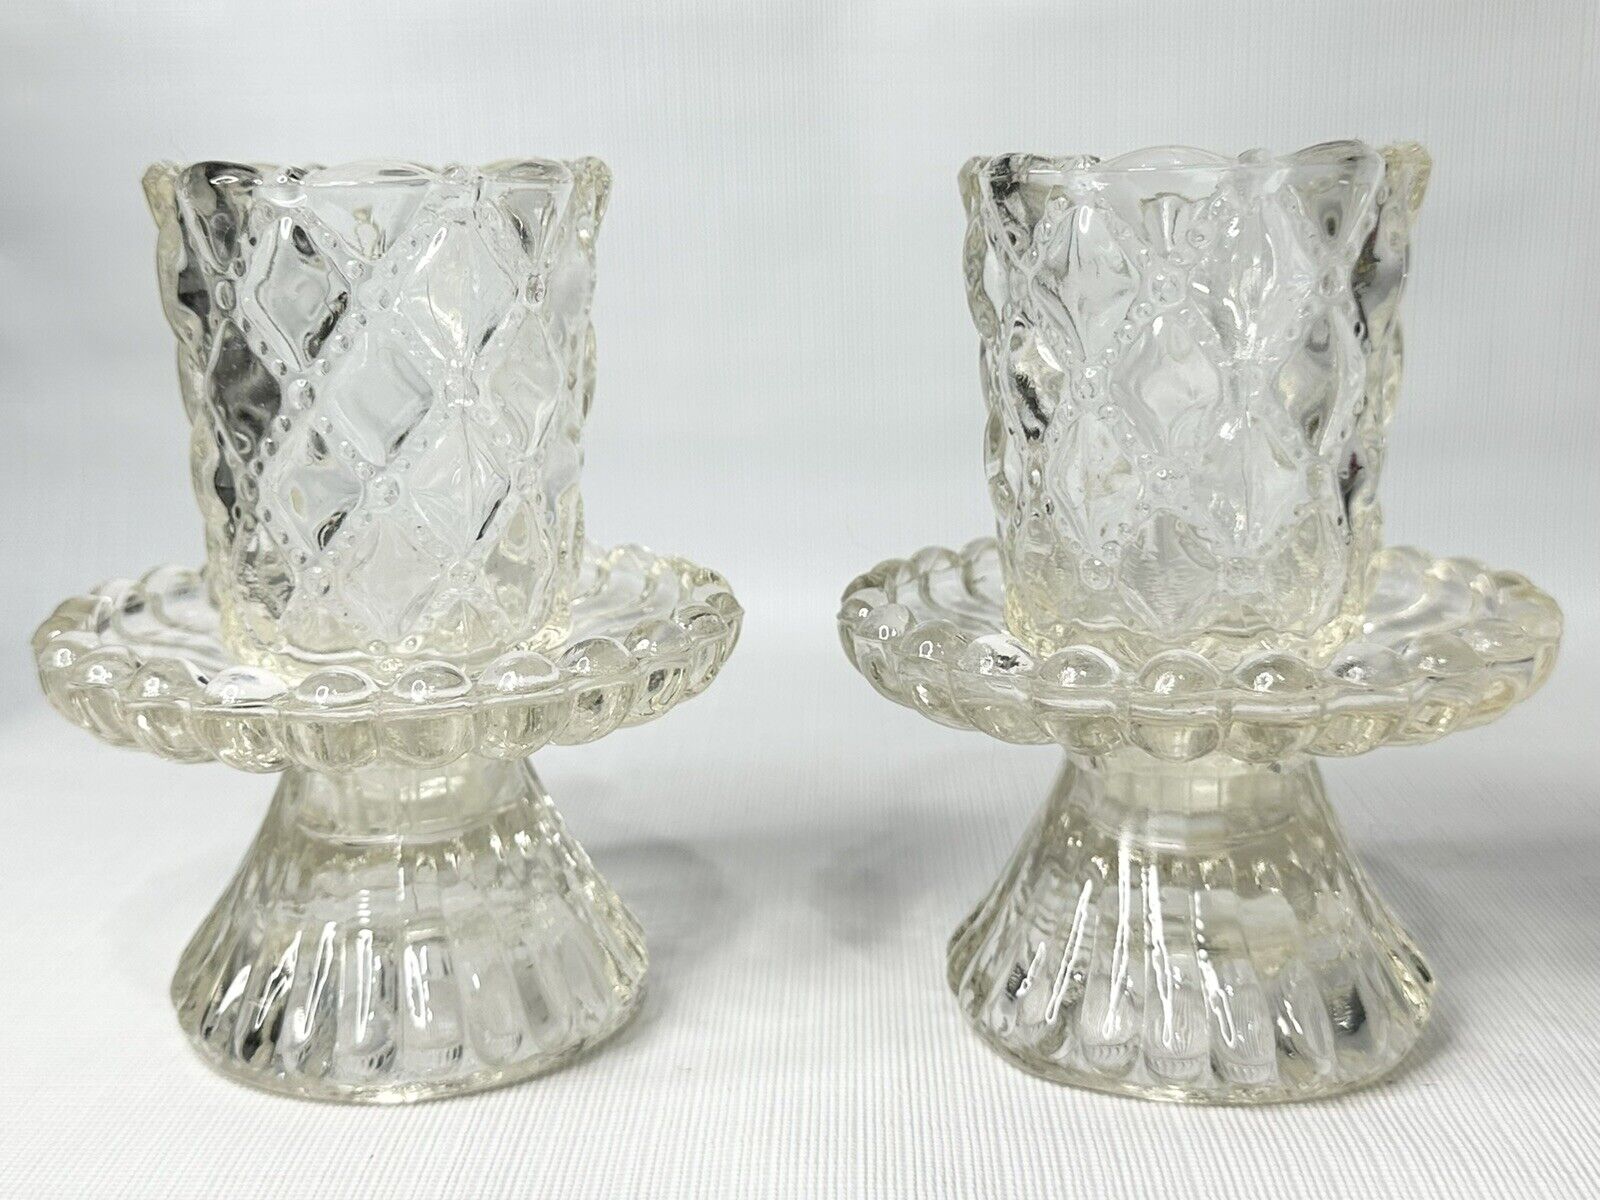 Pair of Partylite P9246 Quilted Crystal Clear Votive/Tea Light Candle Holders